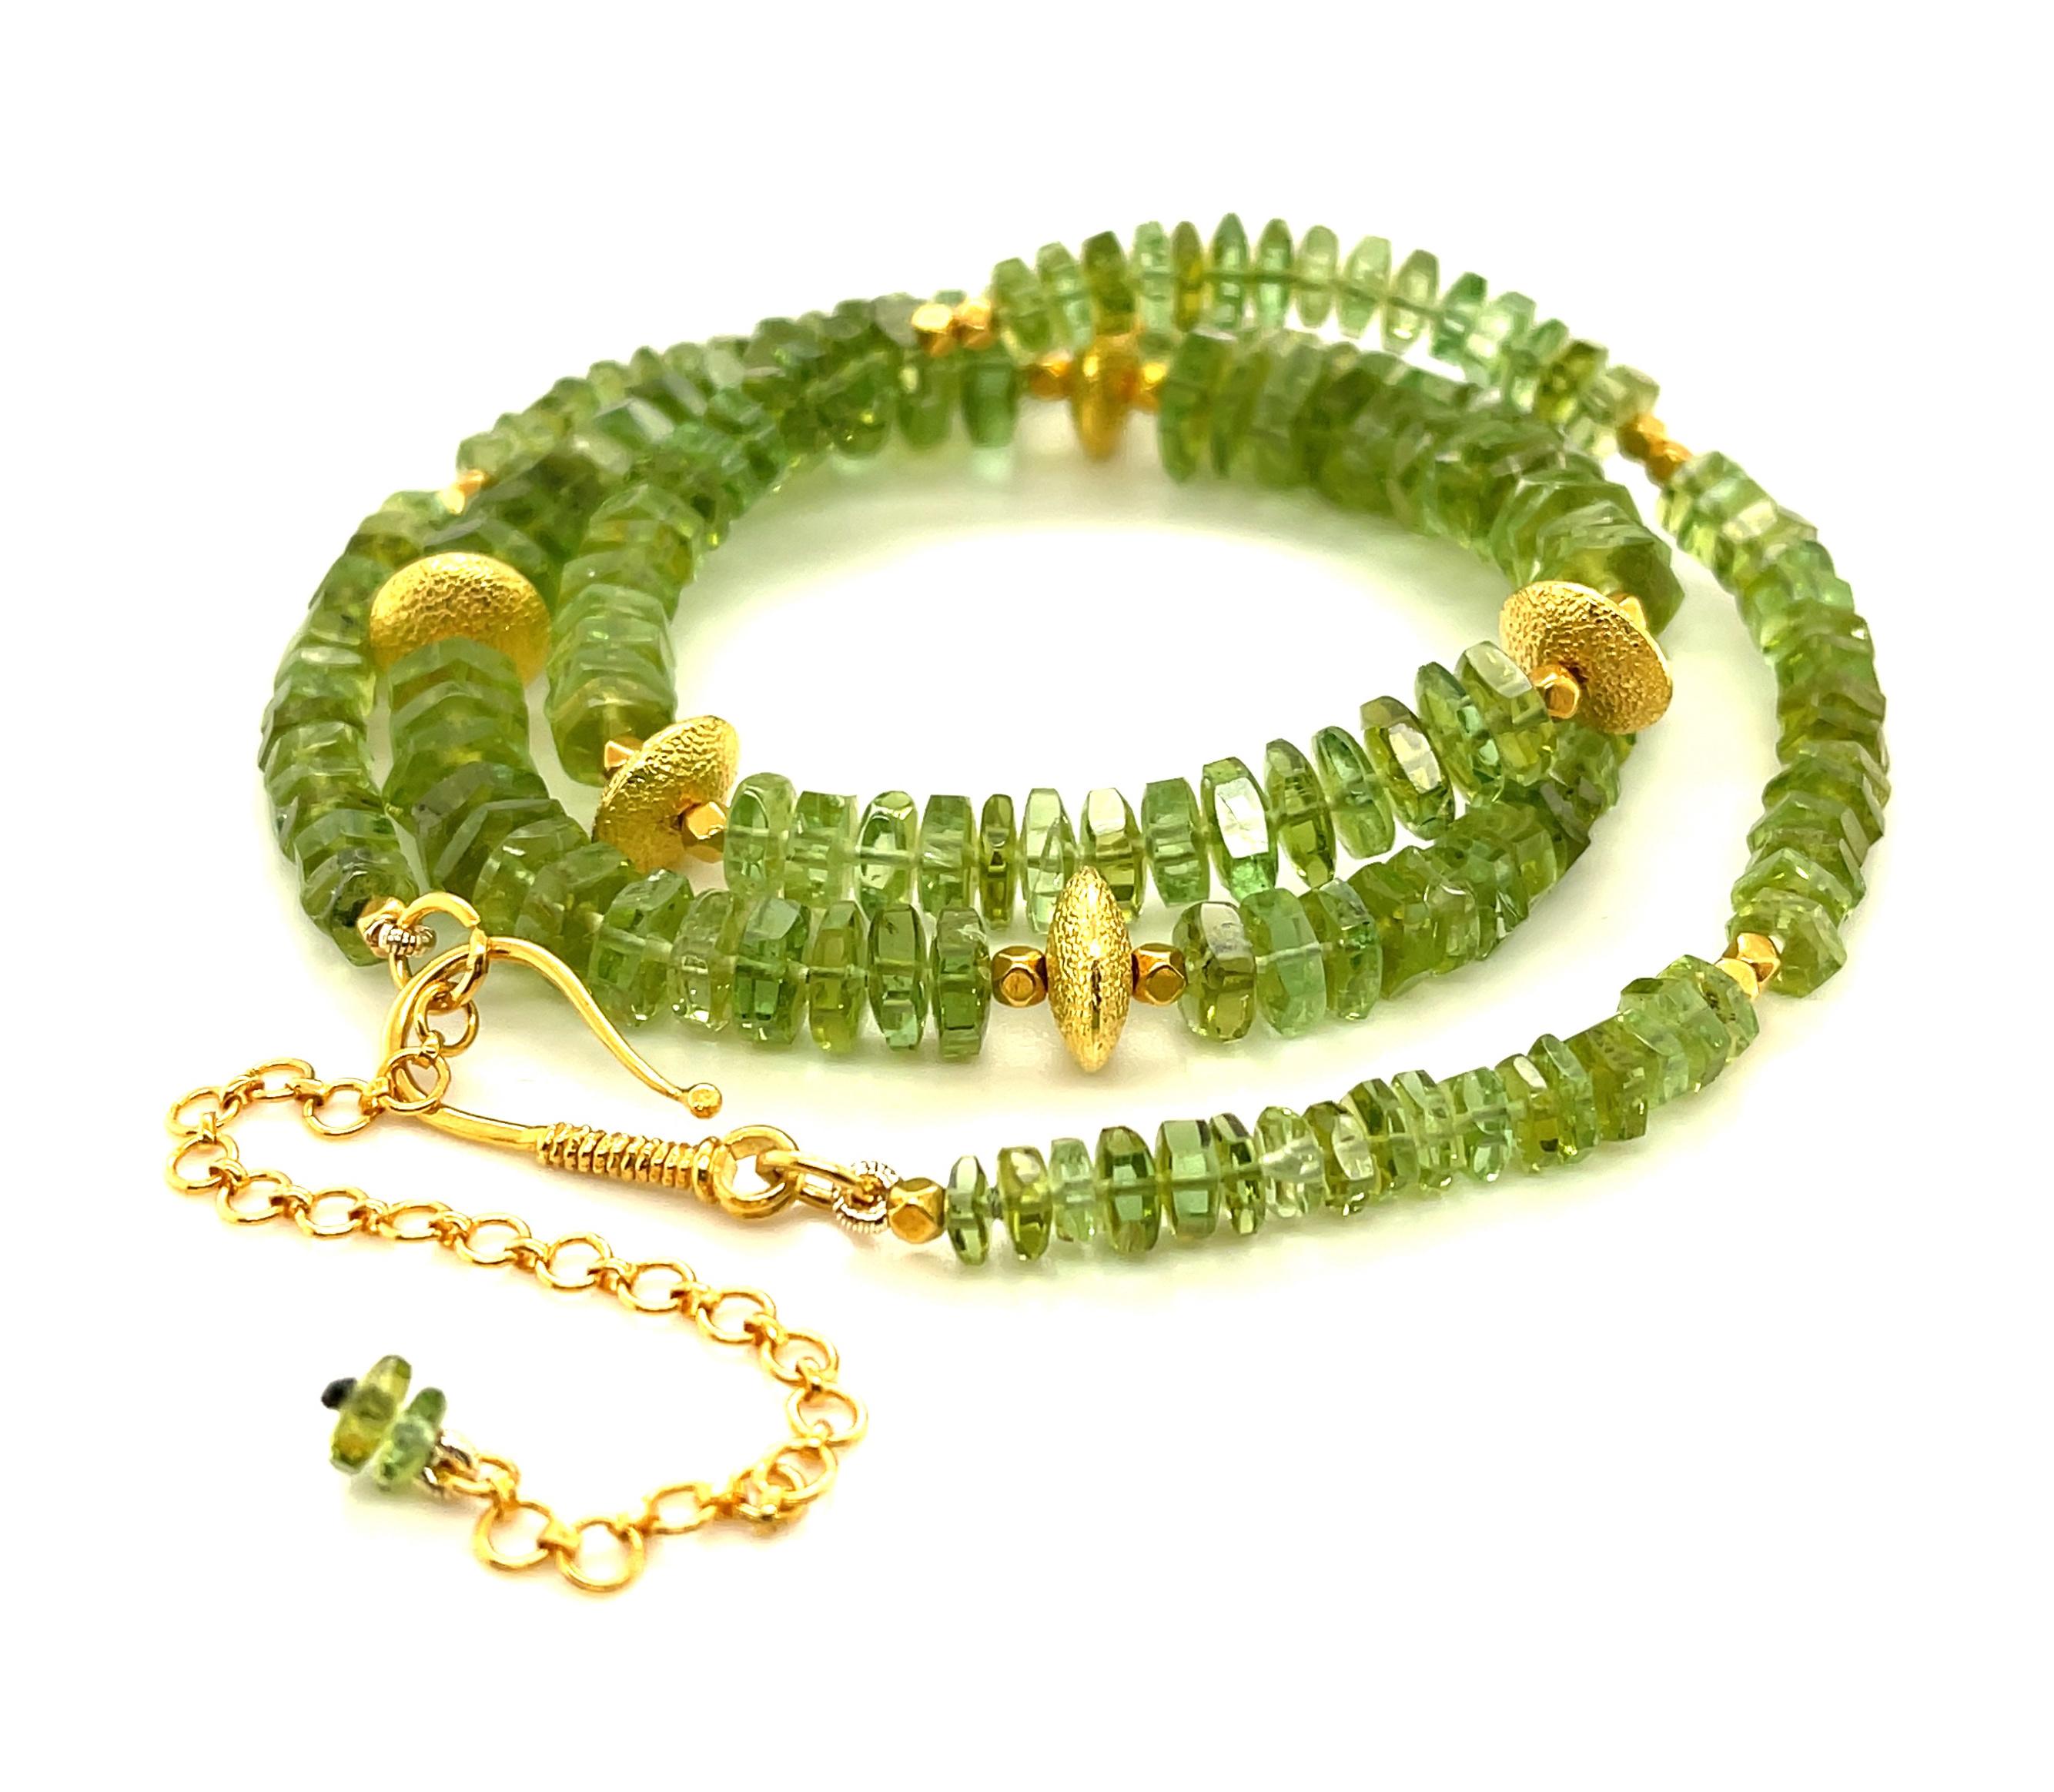 This pretty necklace features a beautiful collection of green tourmaline beads and is adjustable in length! The fine tourmaline beads have bright green color and graduate in size from 5.50 to 8.5mm in diameter. The tourmalines have been arranged